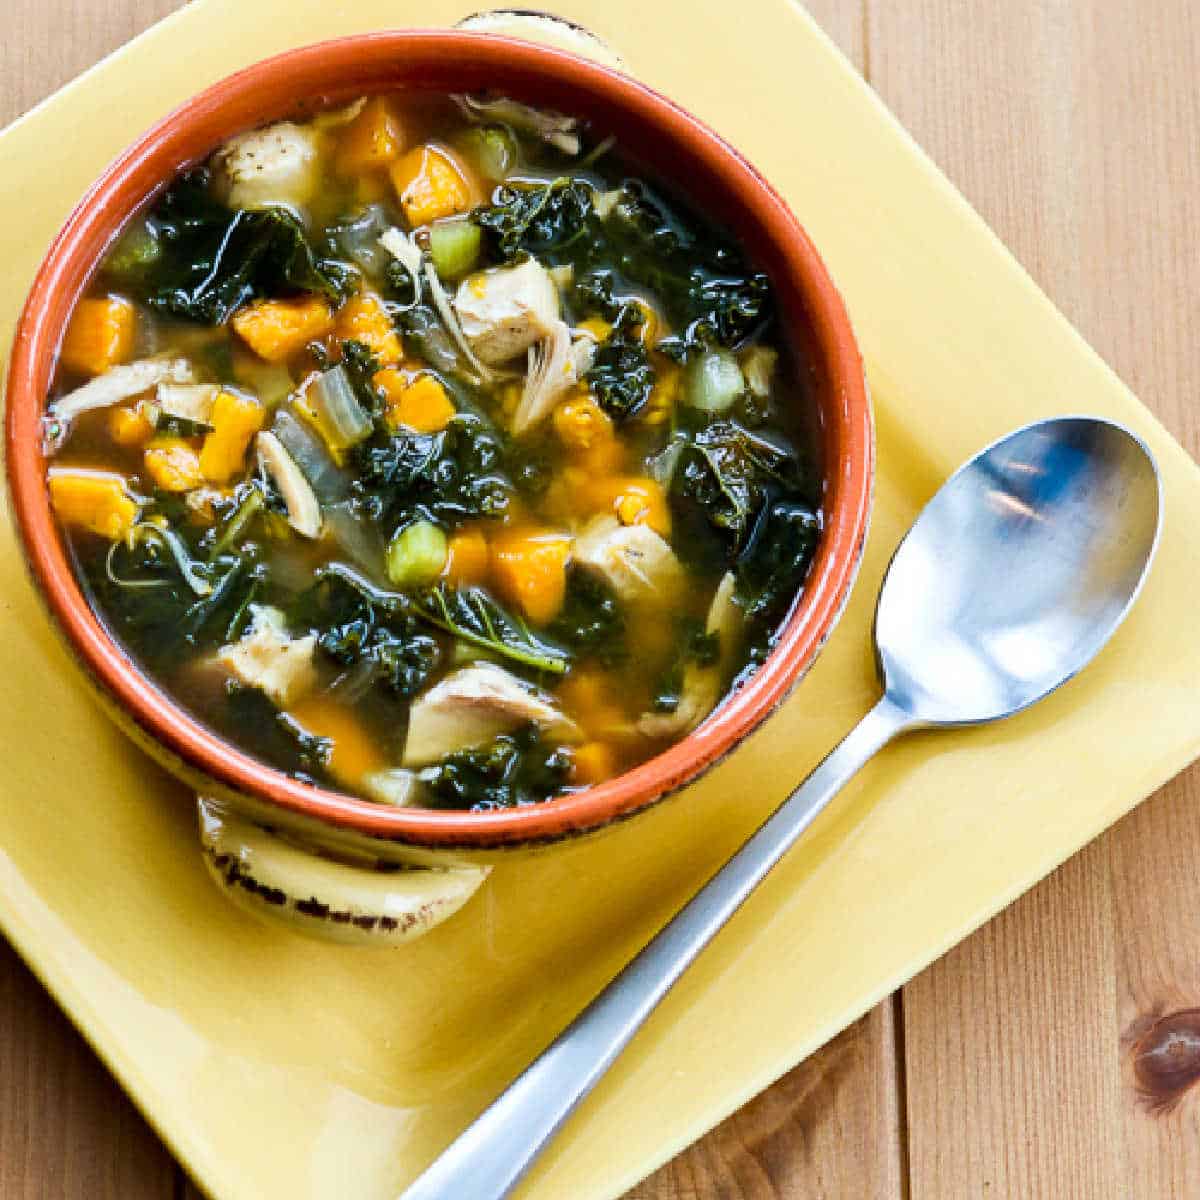 Slow Cooker Turkey Soup with Kale and Sweet Potatoes shown in bowl on yellow plate.